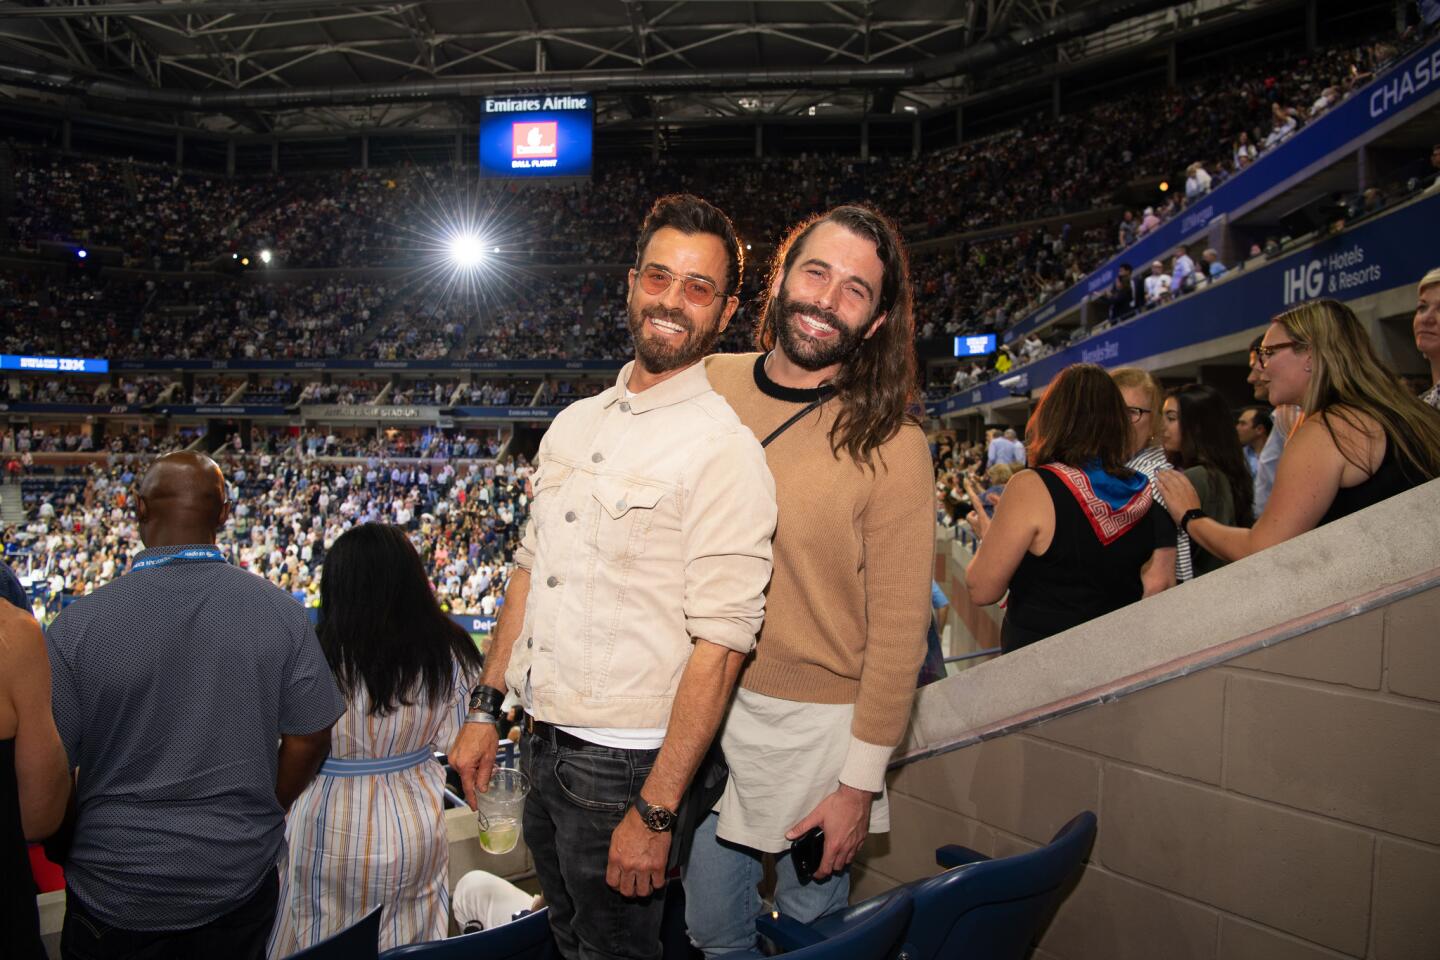 Justin Theroux and Jonathan Van Ness enjoy The Mercedes-Benz VIP Suite at the U.S. Open at Arthur Ashe Stadium on Sept. 3, 2019, in New York City.